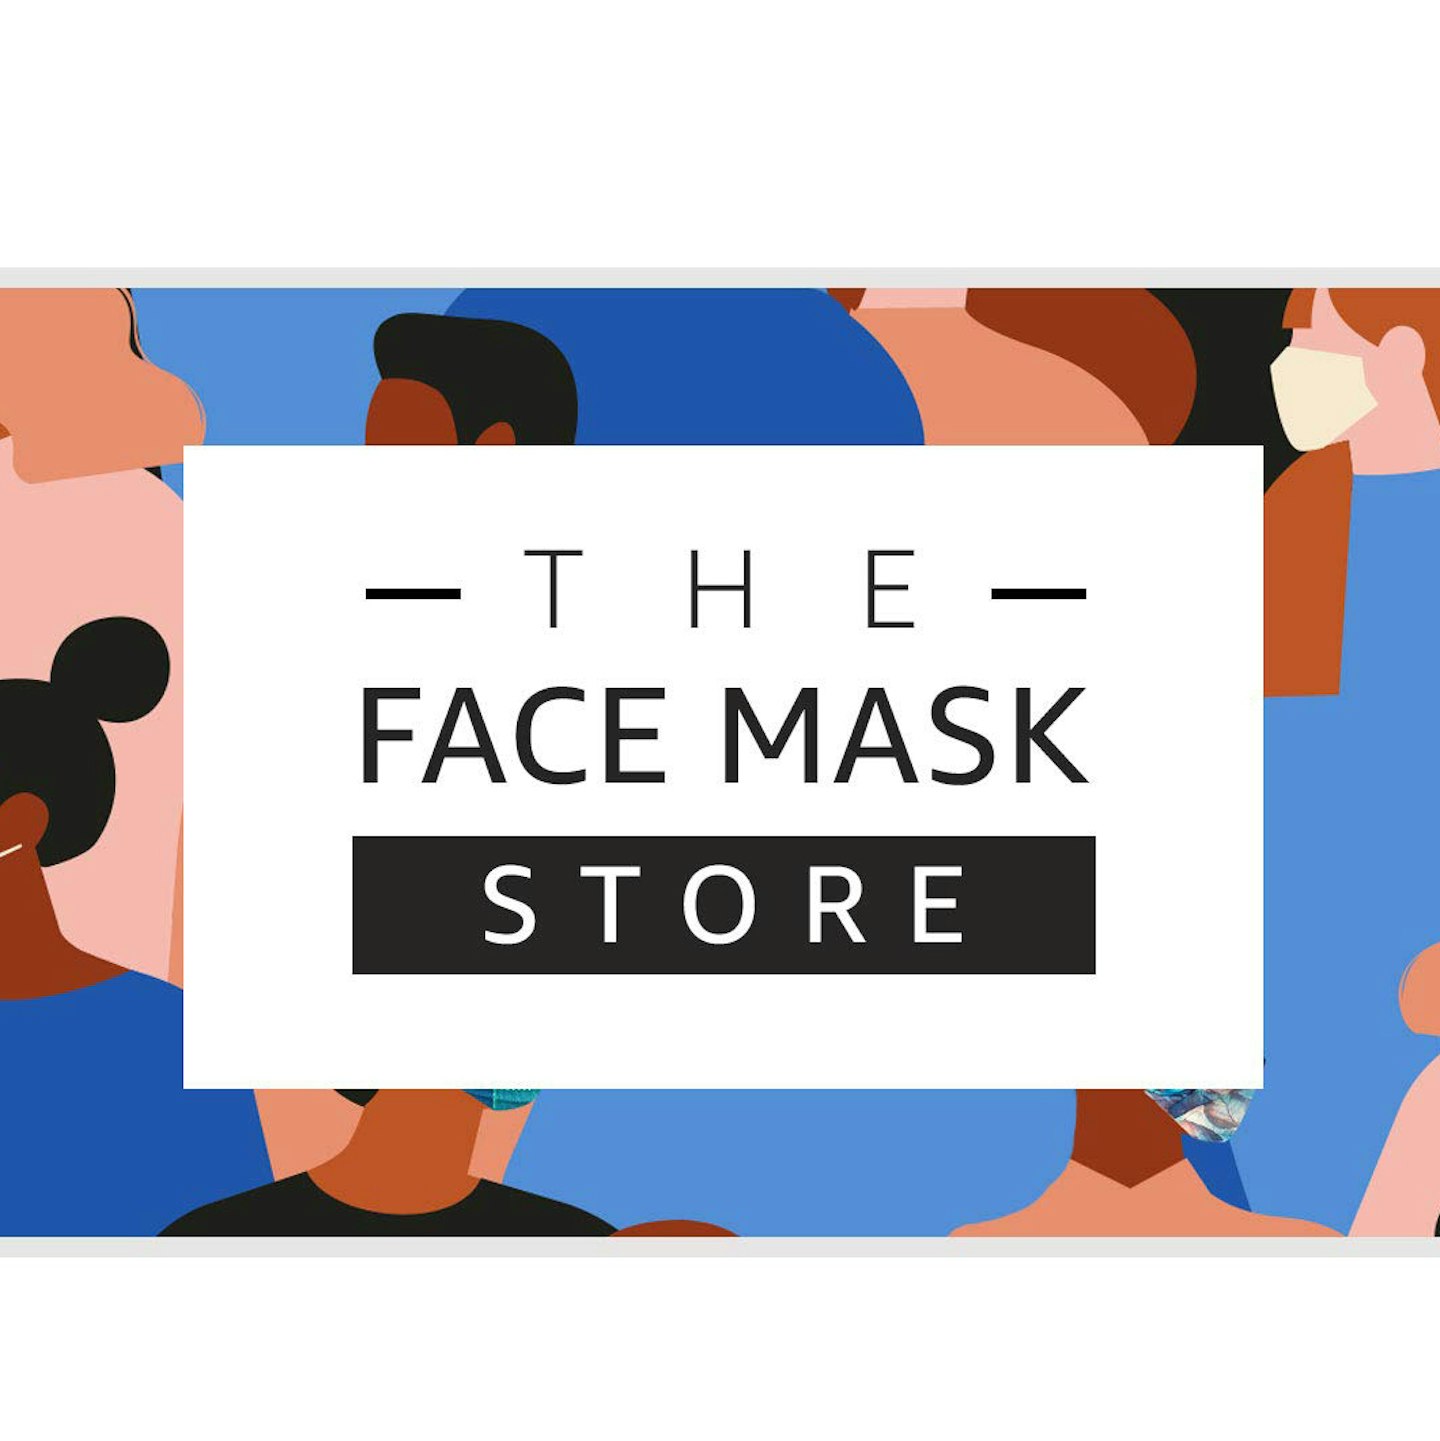 The Face Mask Store at Amazon 